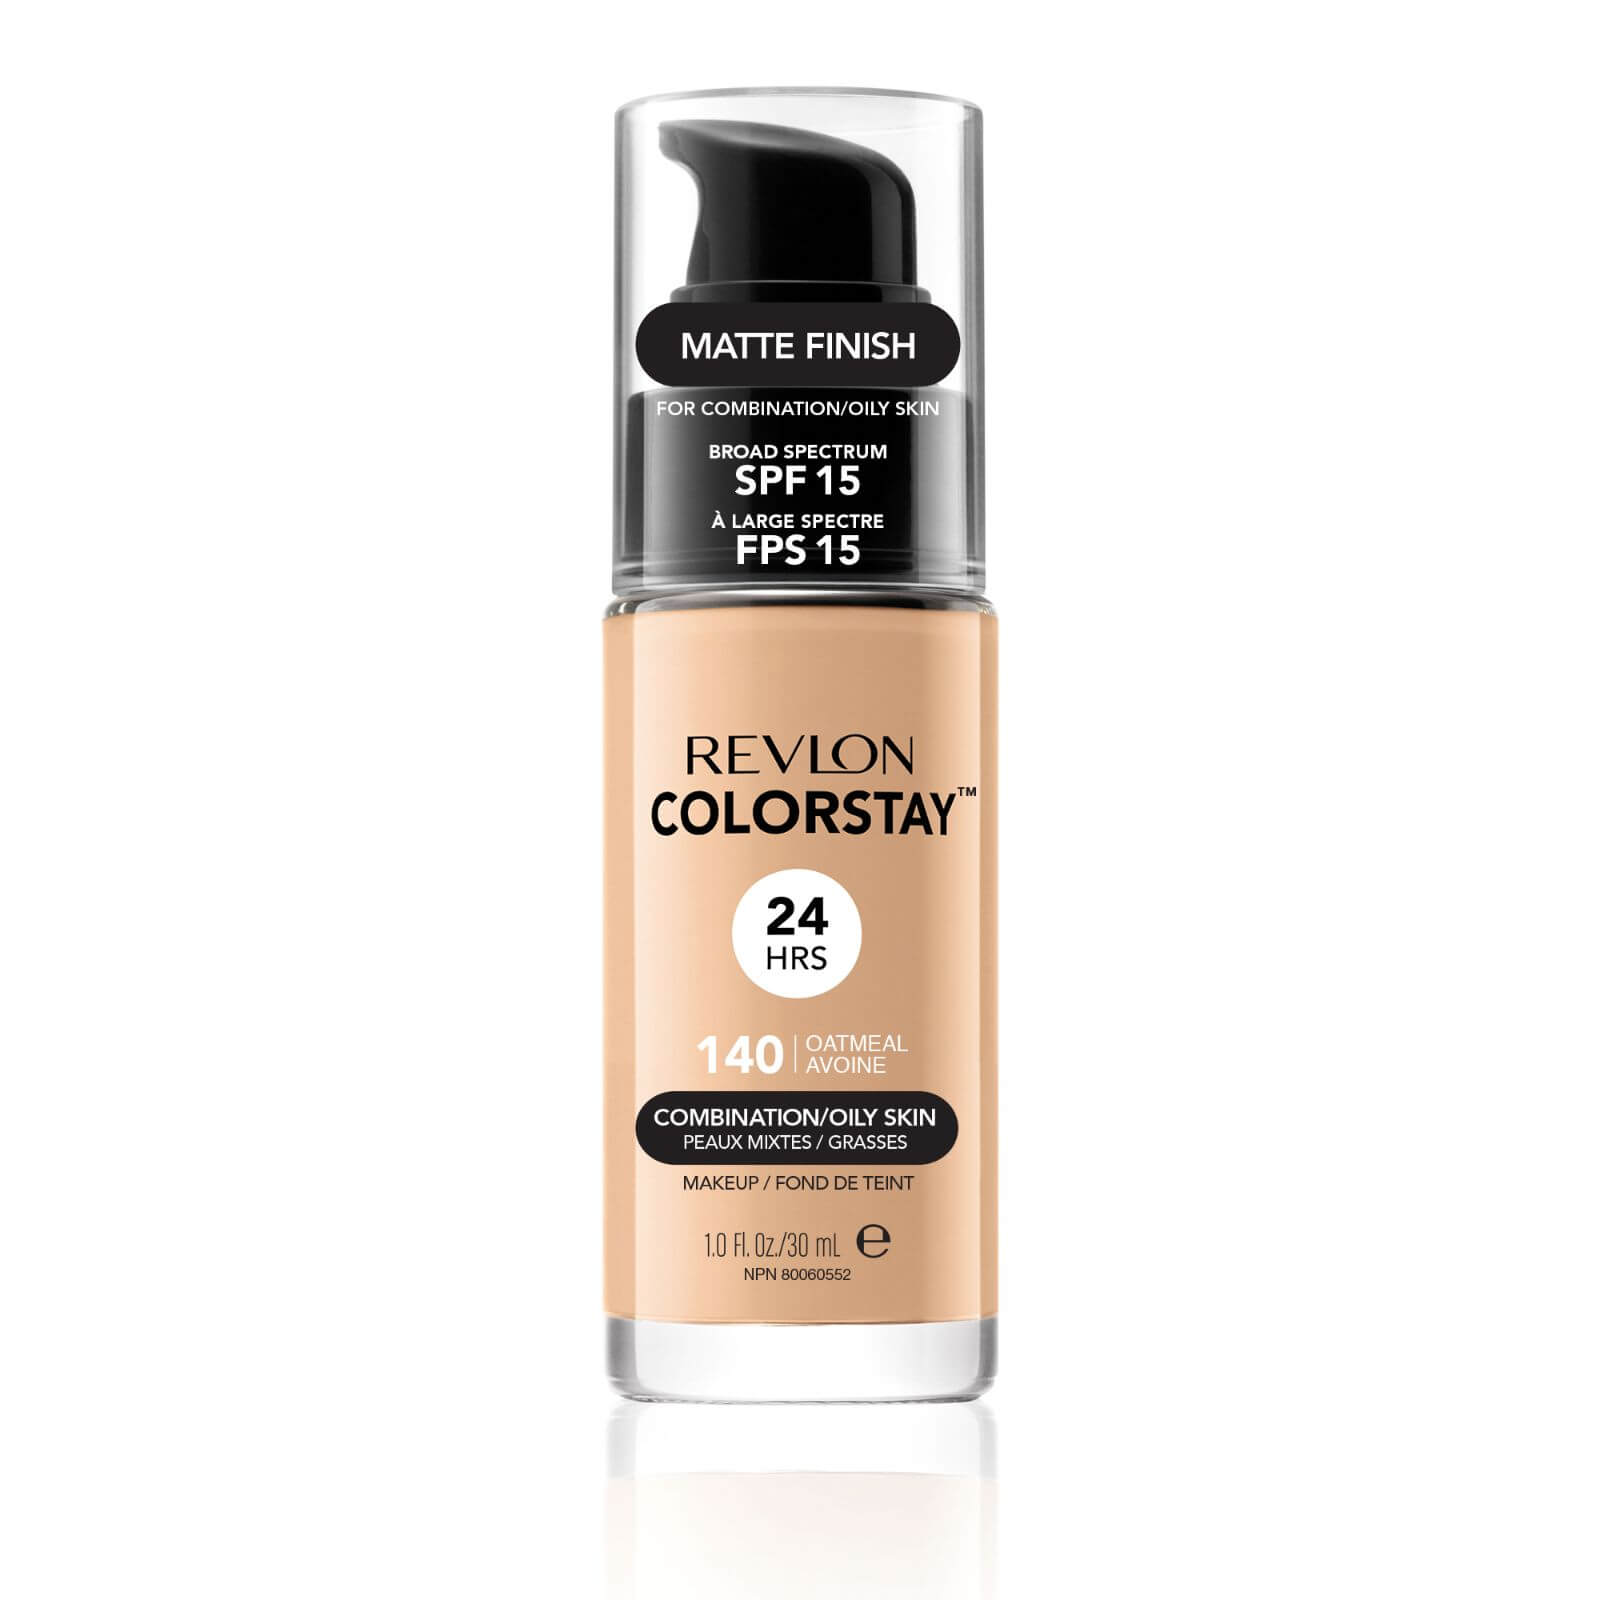 Revlon ColorStay Make-Up Foundation for Combination/Oily Skin (Various Shades) - Oatmeal